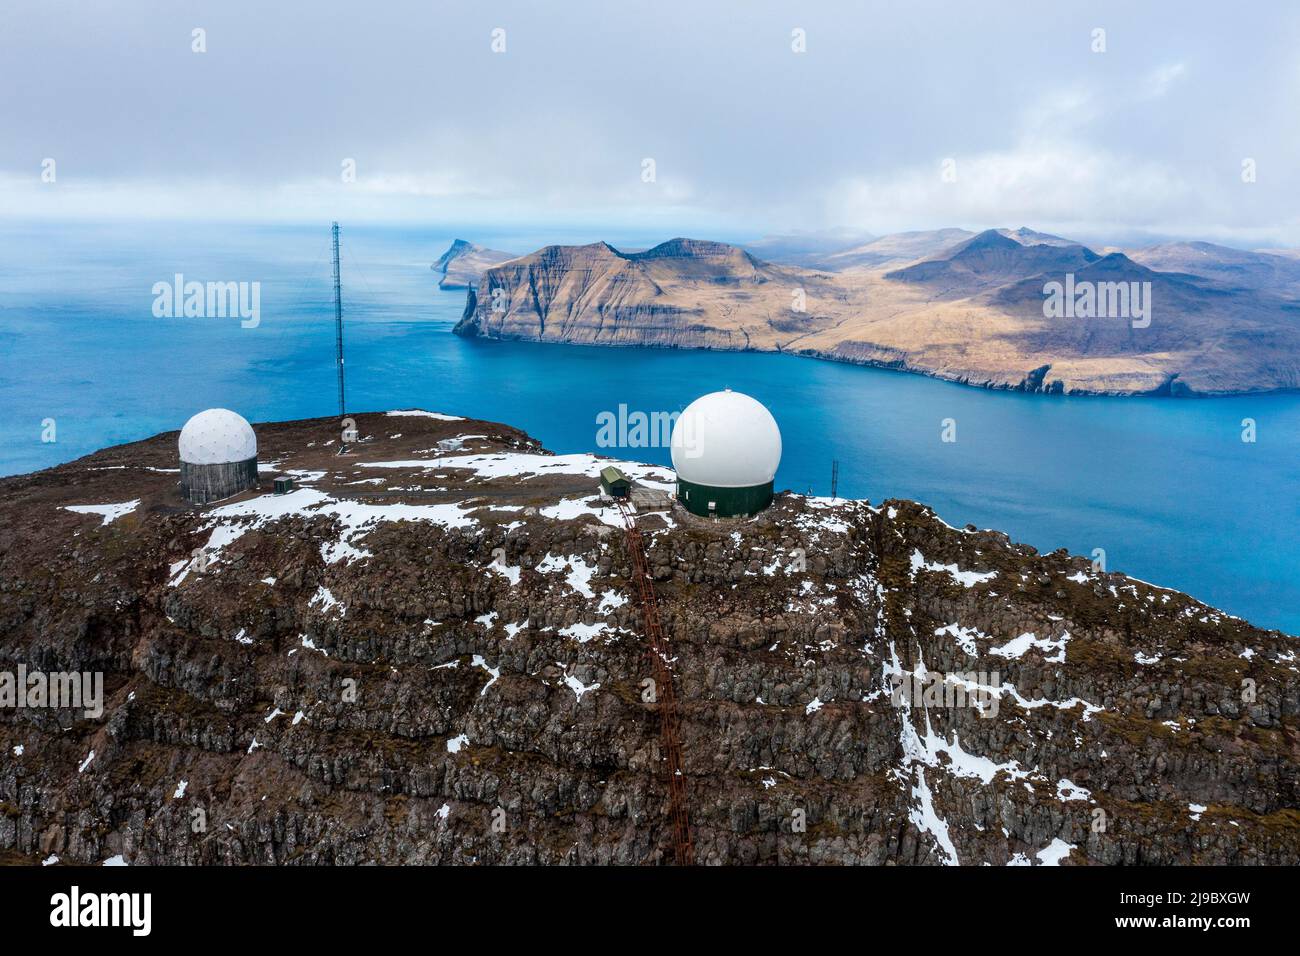 Other-worldly white globes on the rugged rock are the remnants of a Cold War military base. Stock Photo